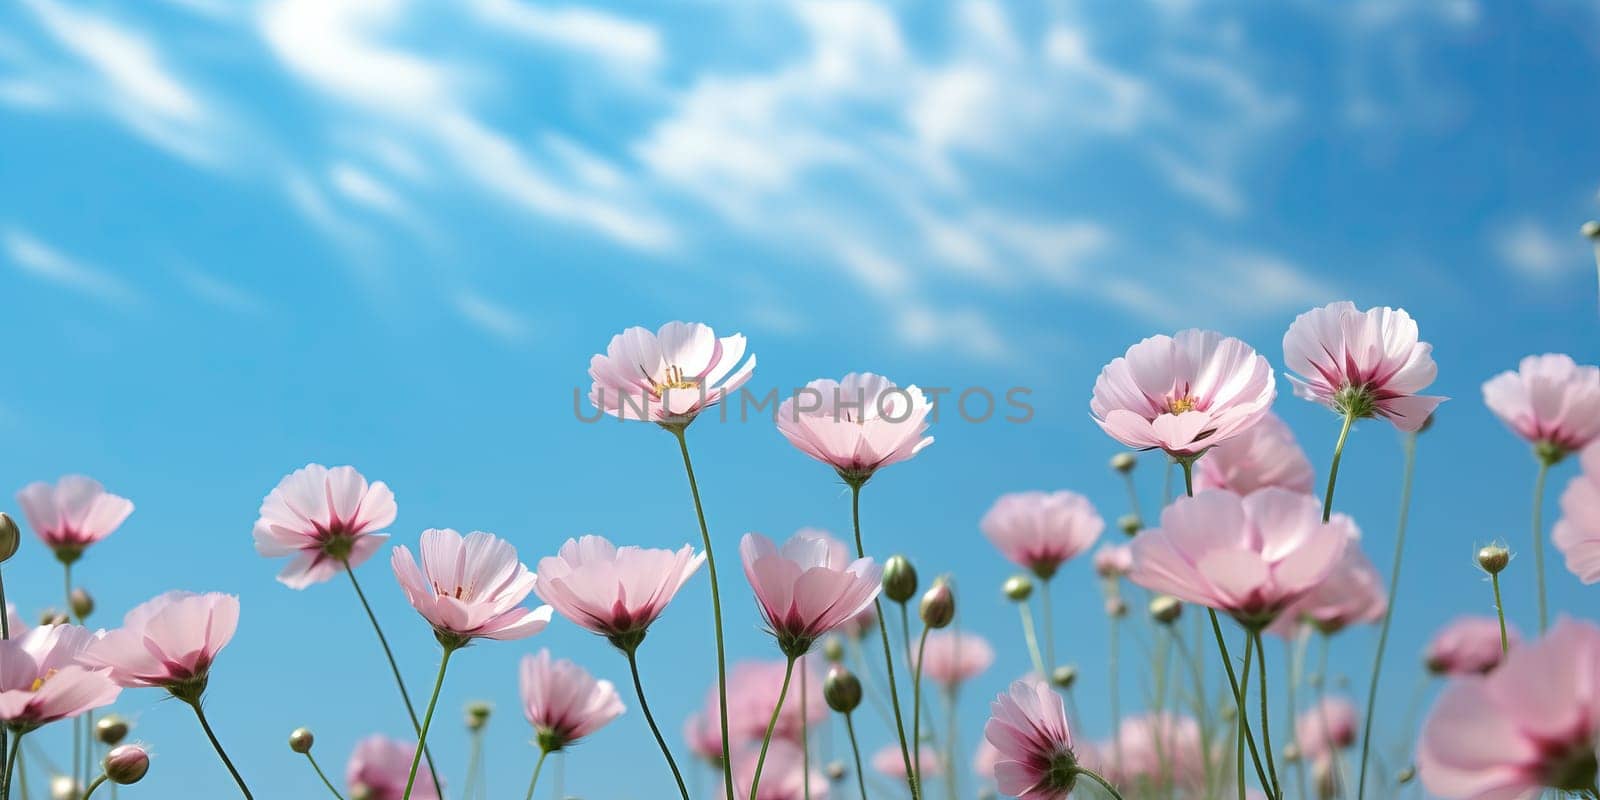 Blooming Pink Cosmos Flowers Under a Clear Blue Sky